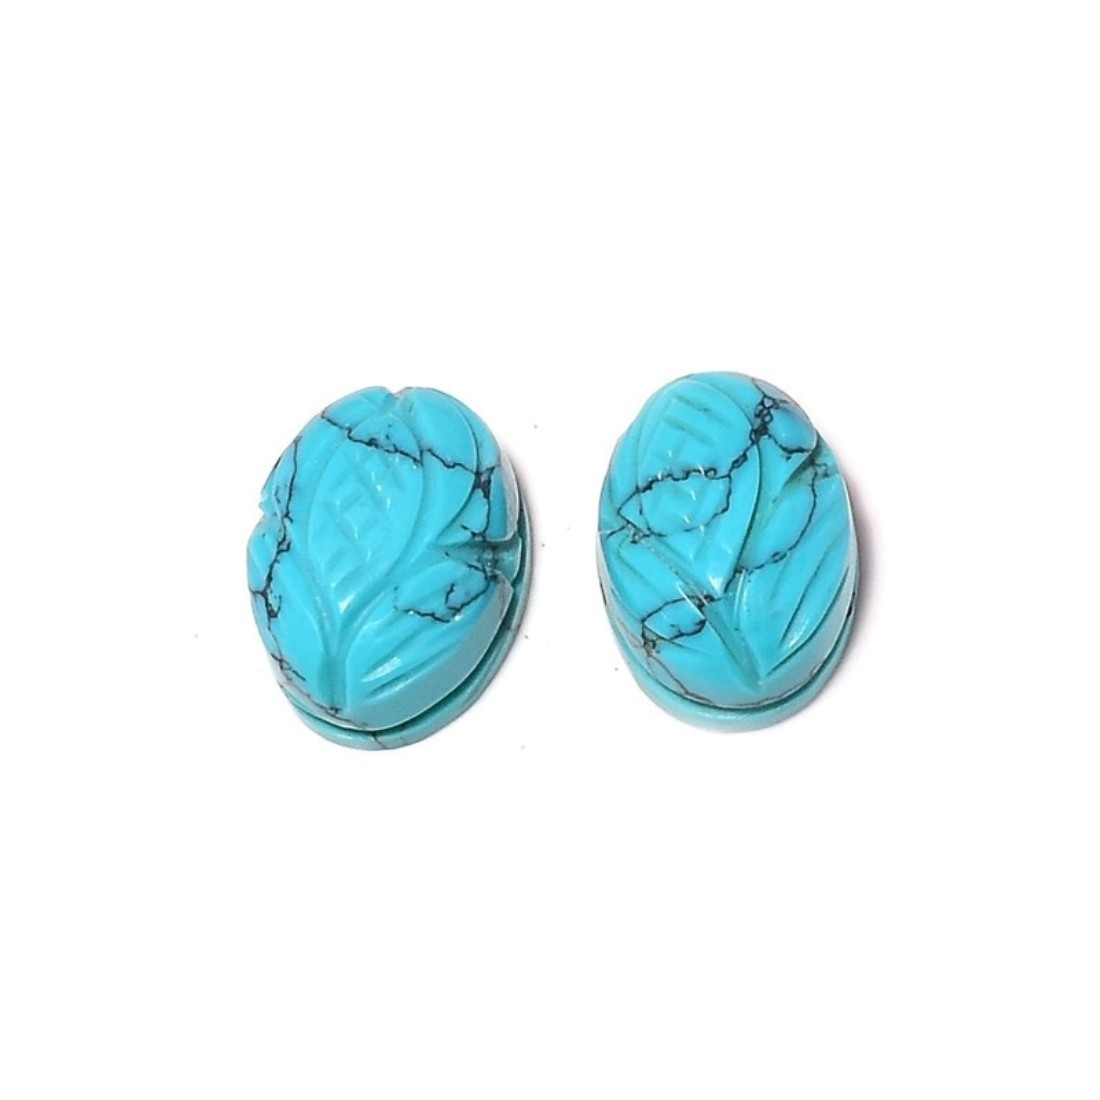 Primary image for 11.8 Carat 2 pcs Turquoise Flower Hand Carving Loose Gemstone for Jewelry Making